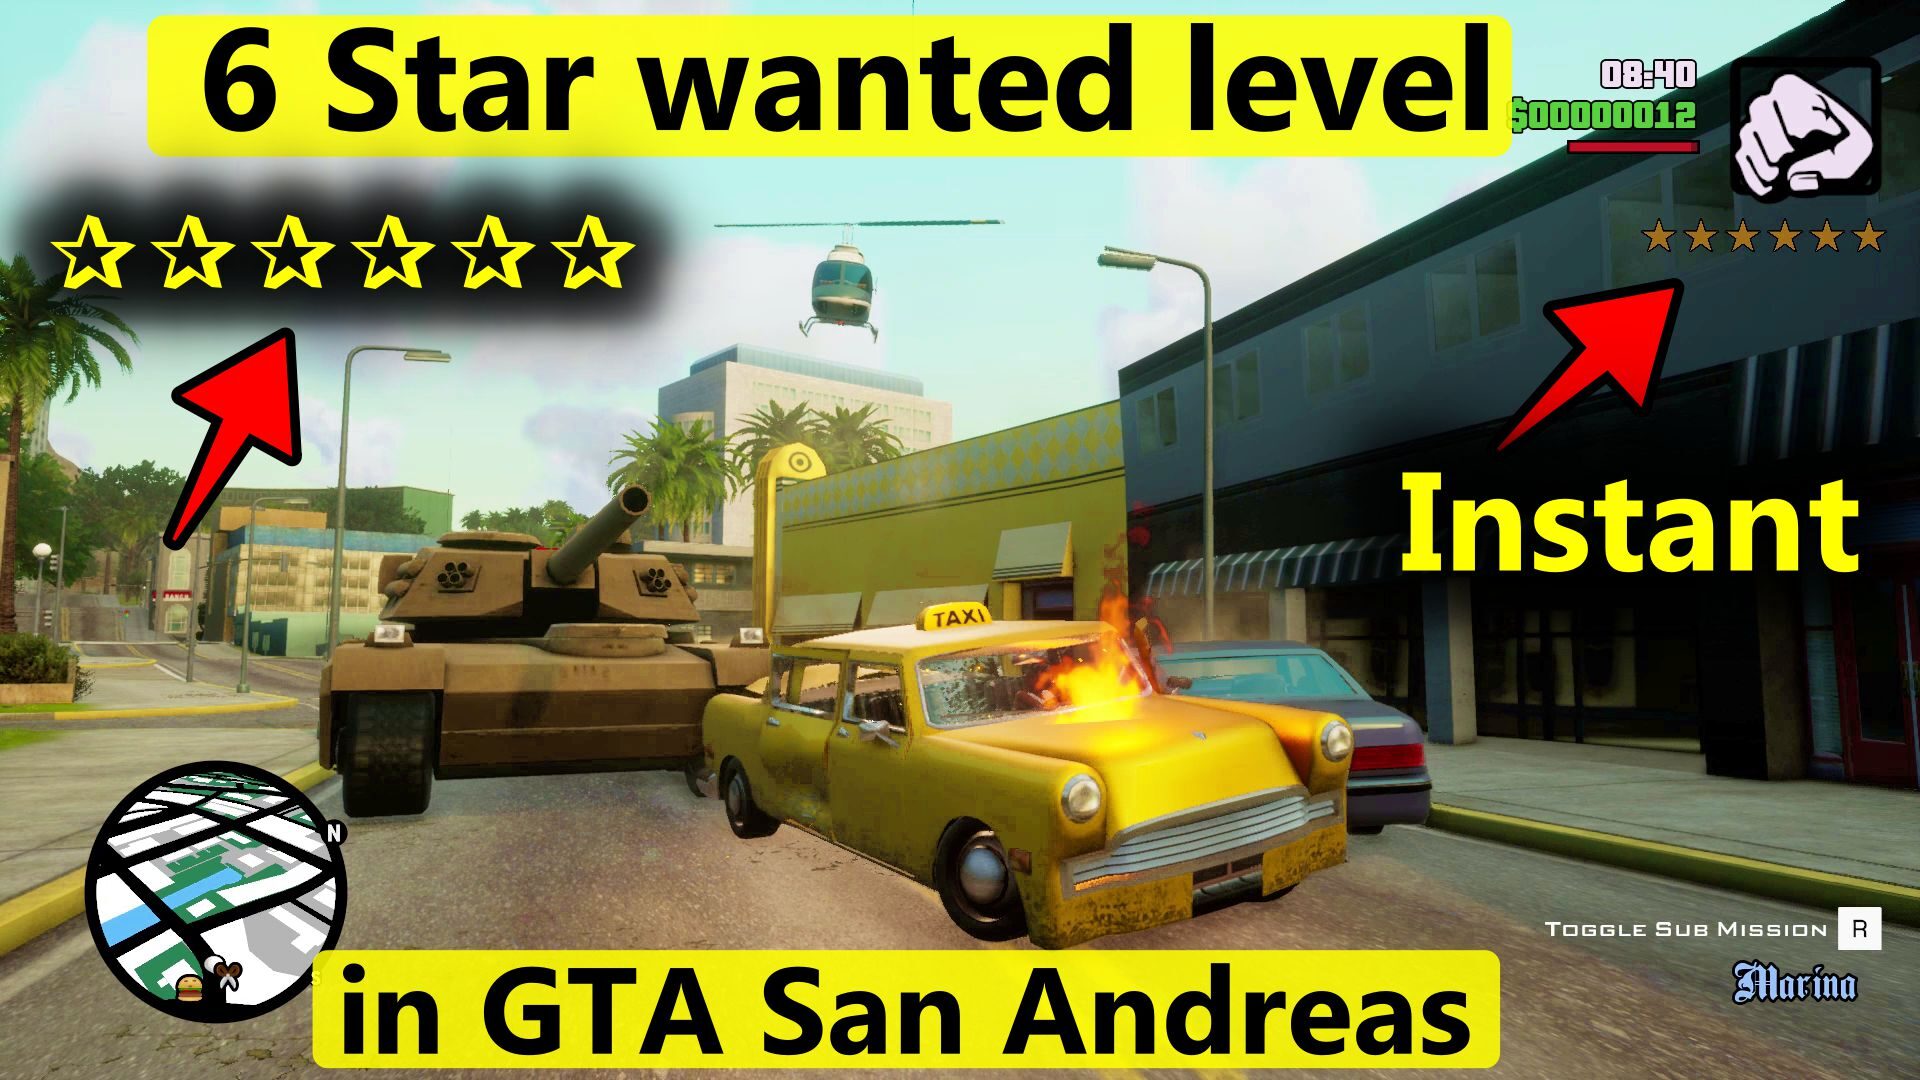 how to get Instant - 6 Star wanted level in GTA San Andreas